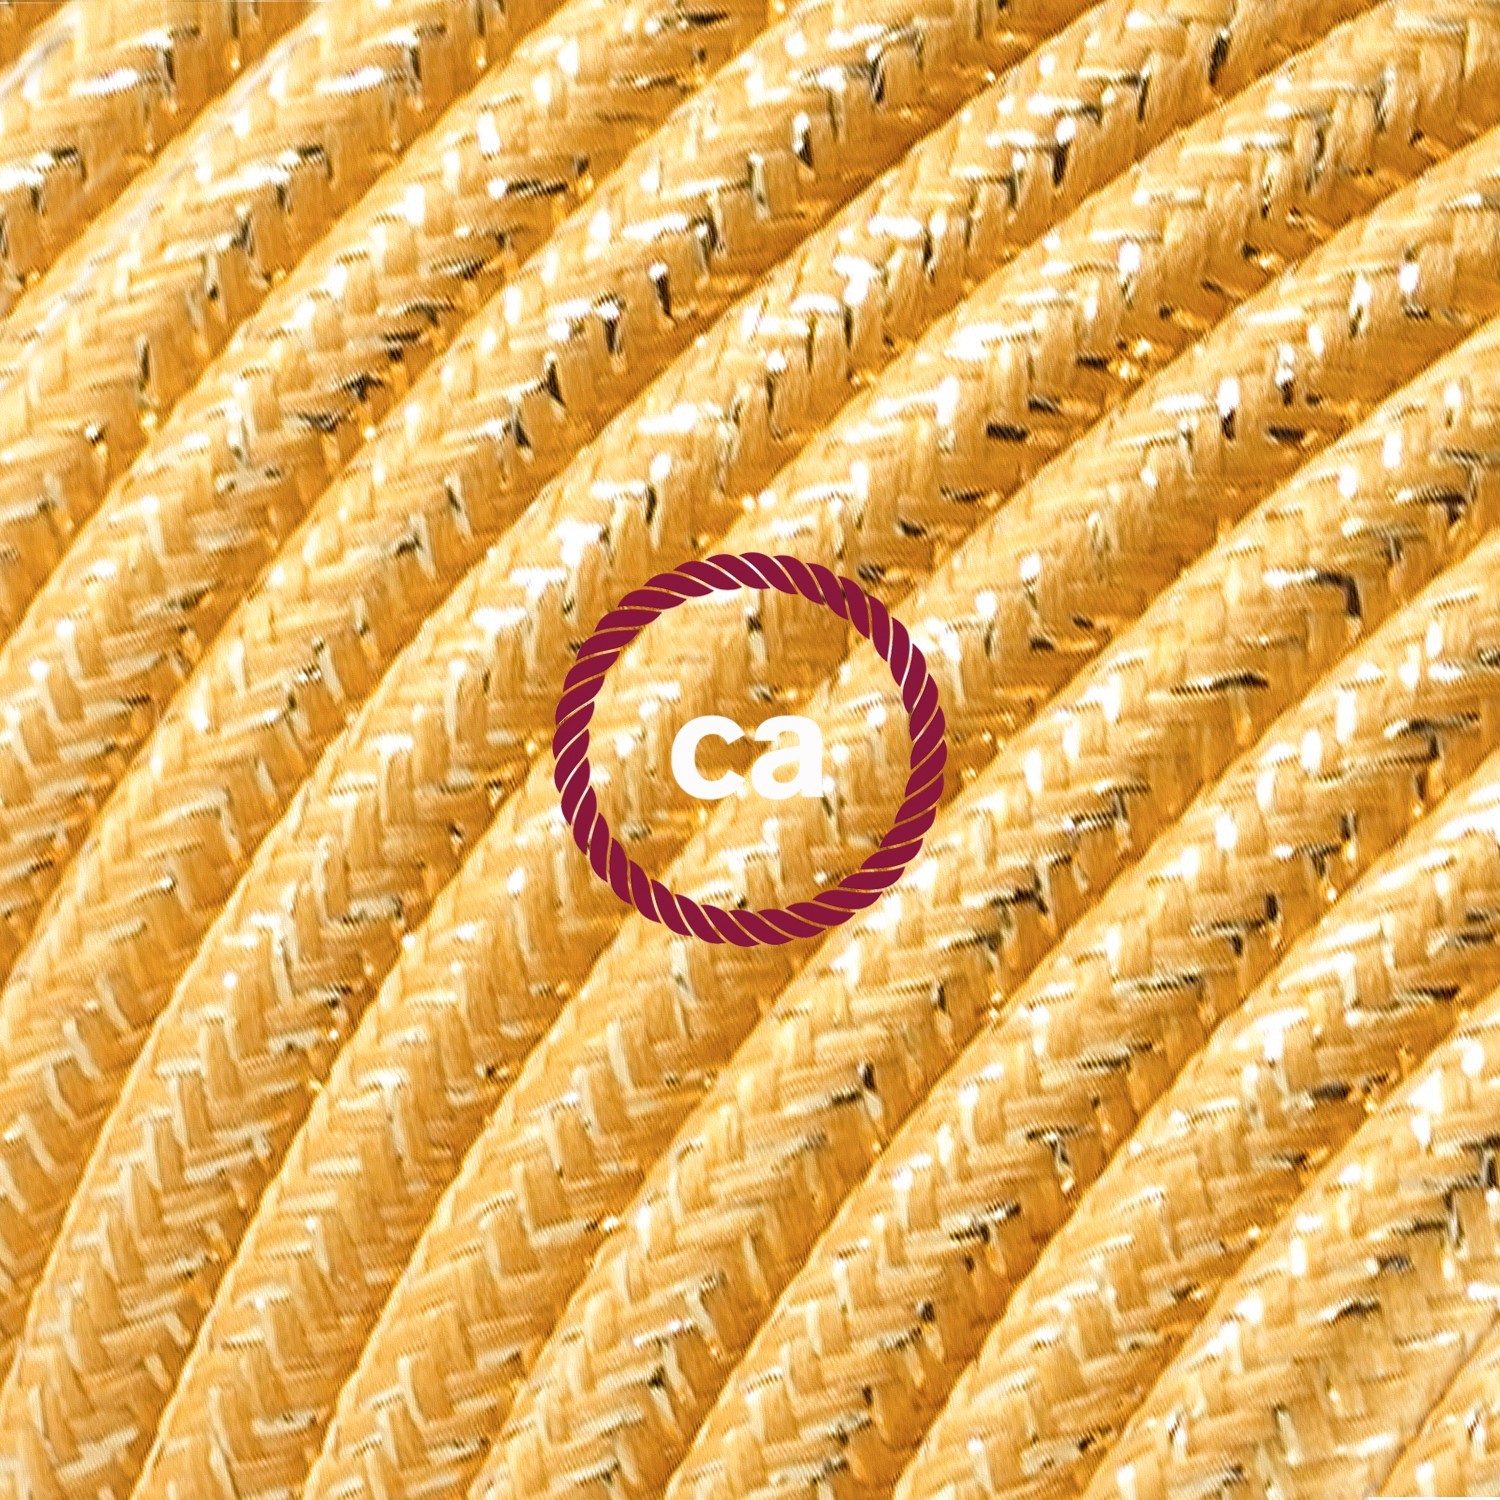 In a box Round Glittering Electric Cable covered by Rayon solid color fabric RL05 Gold